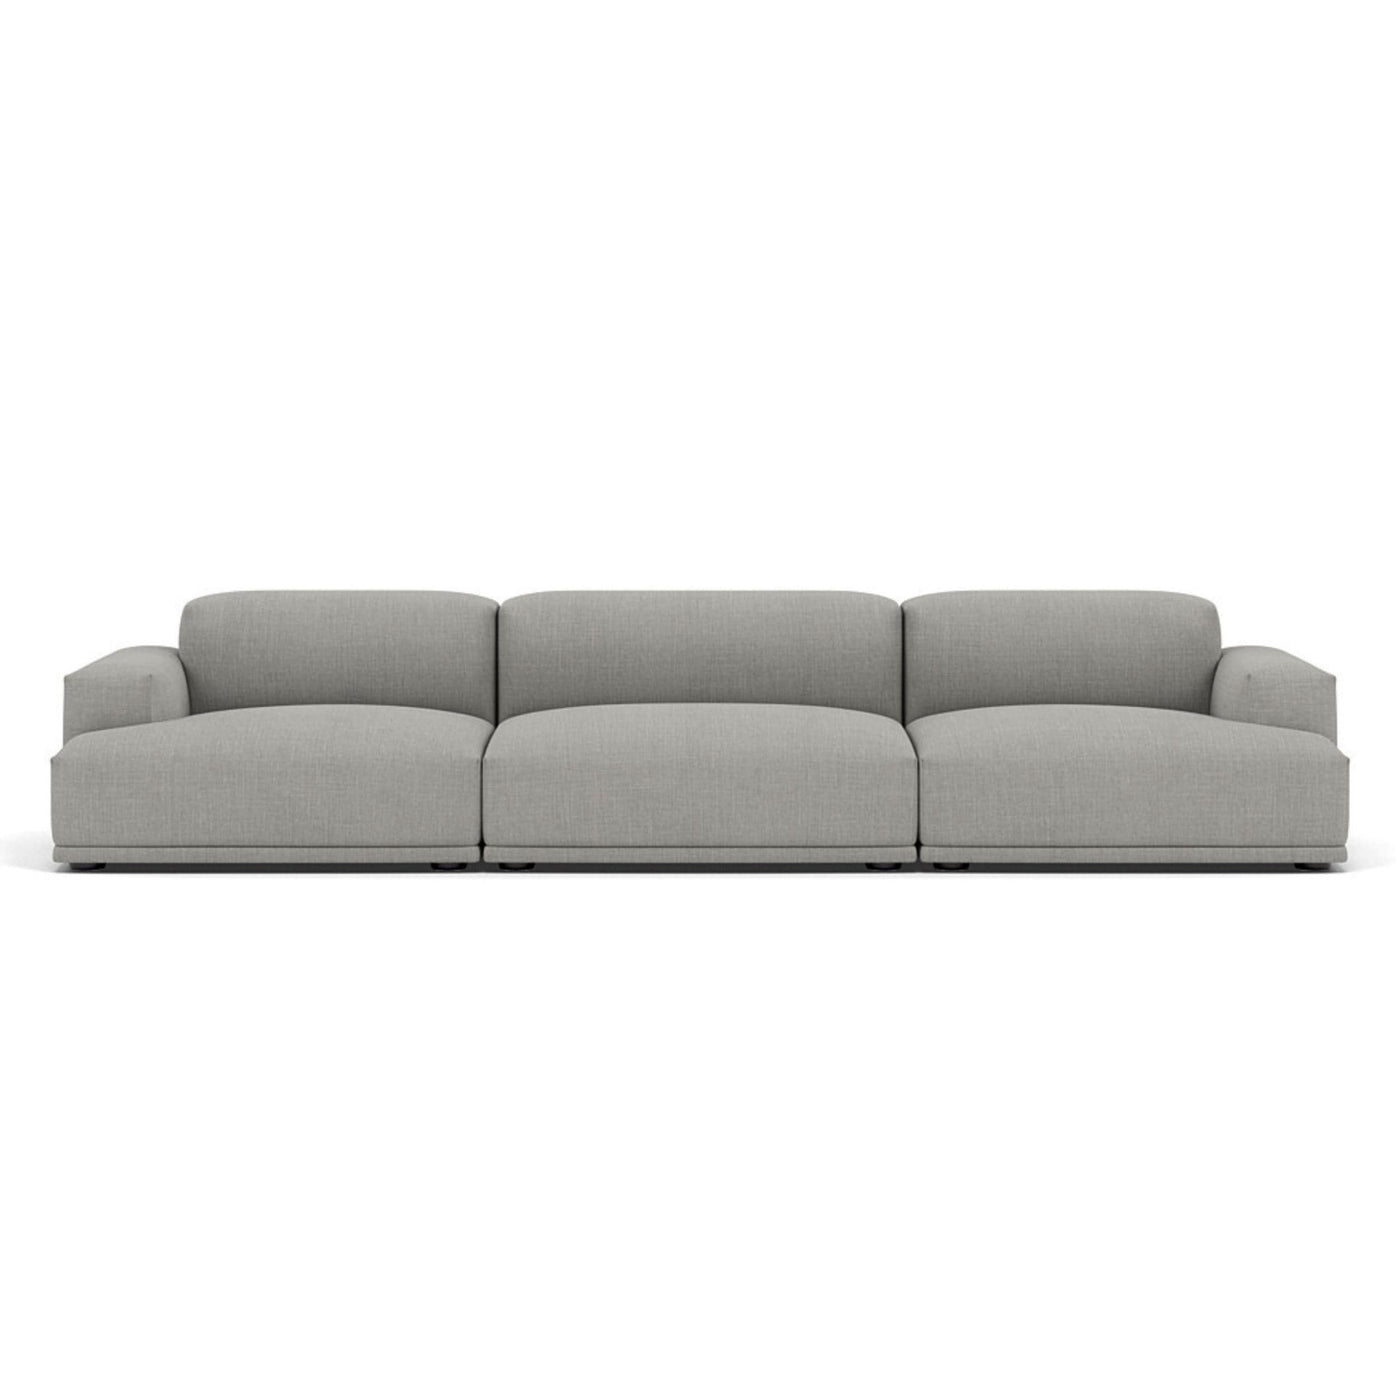 Muuto Connect modular sofa 3 seater. Made to order from someday designs.  #colour_remix-133